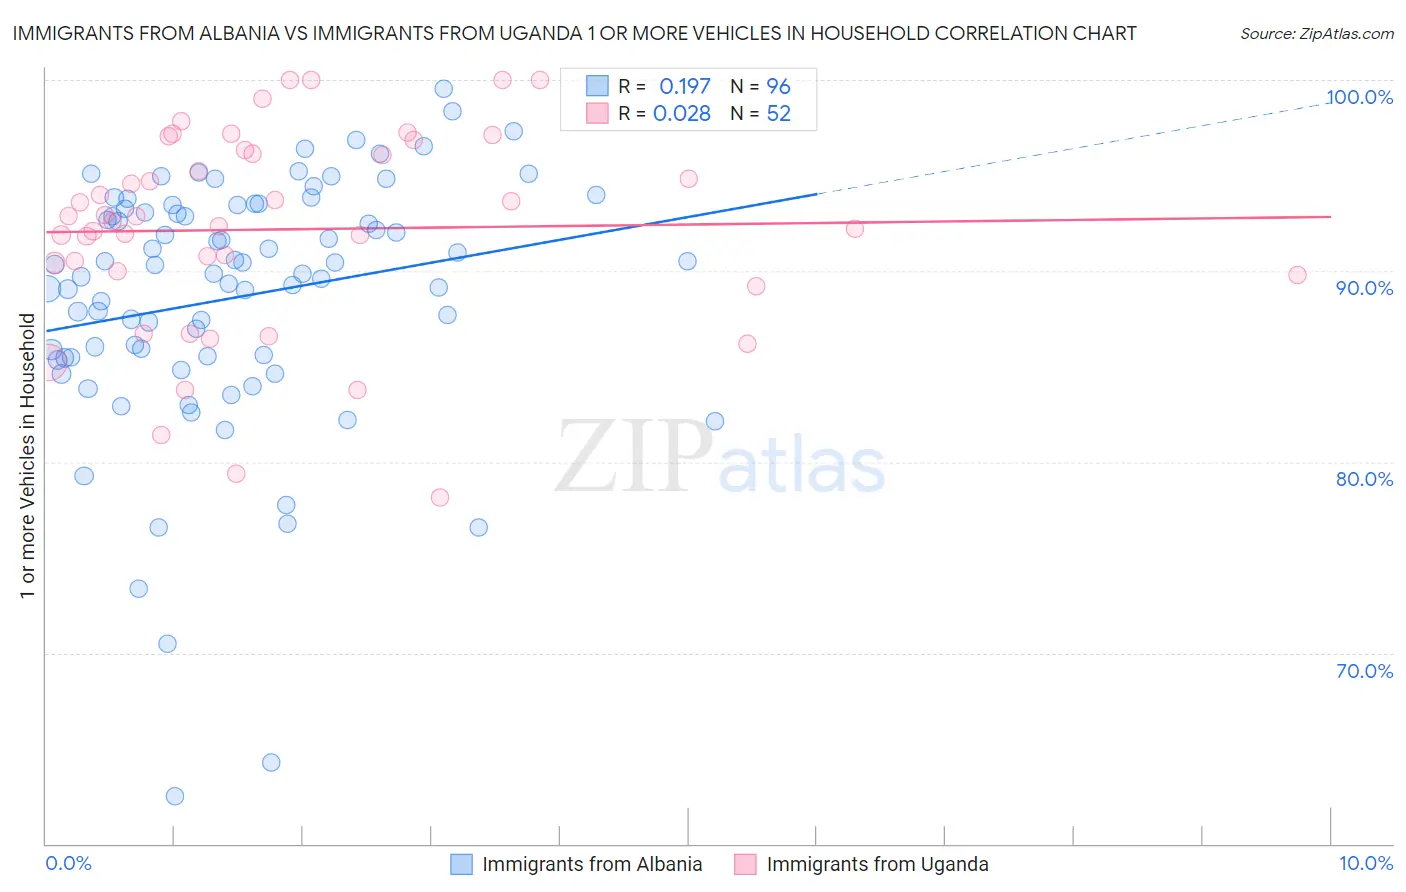 Immigrants from Albania vs Immigrants from Uganda 1 or more Vehicles in Household